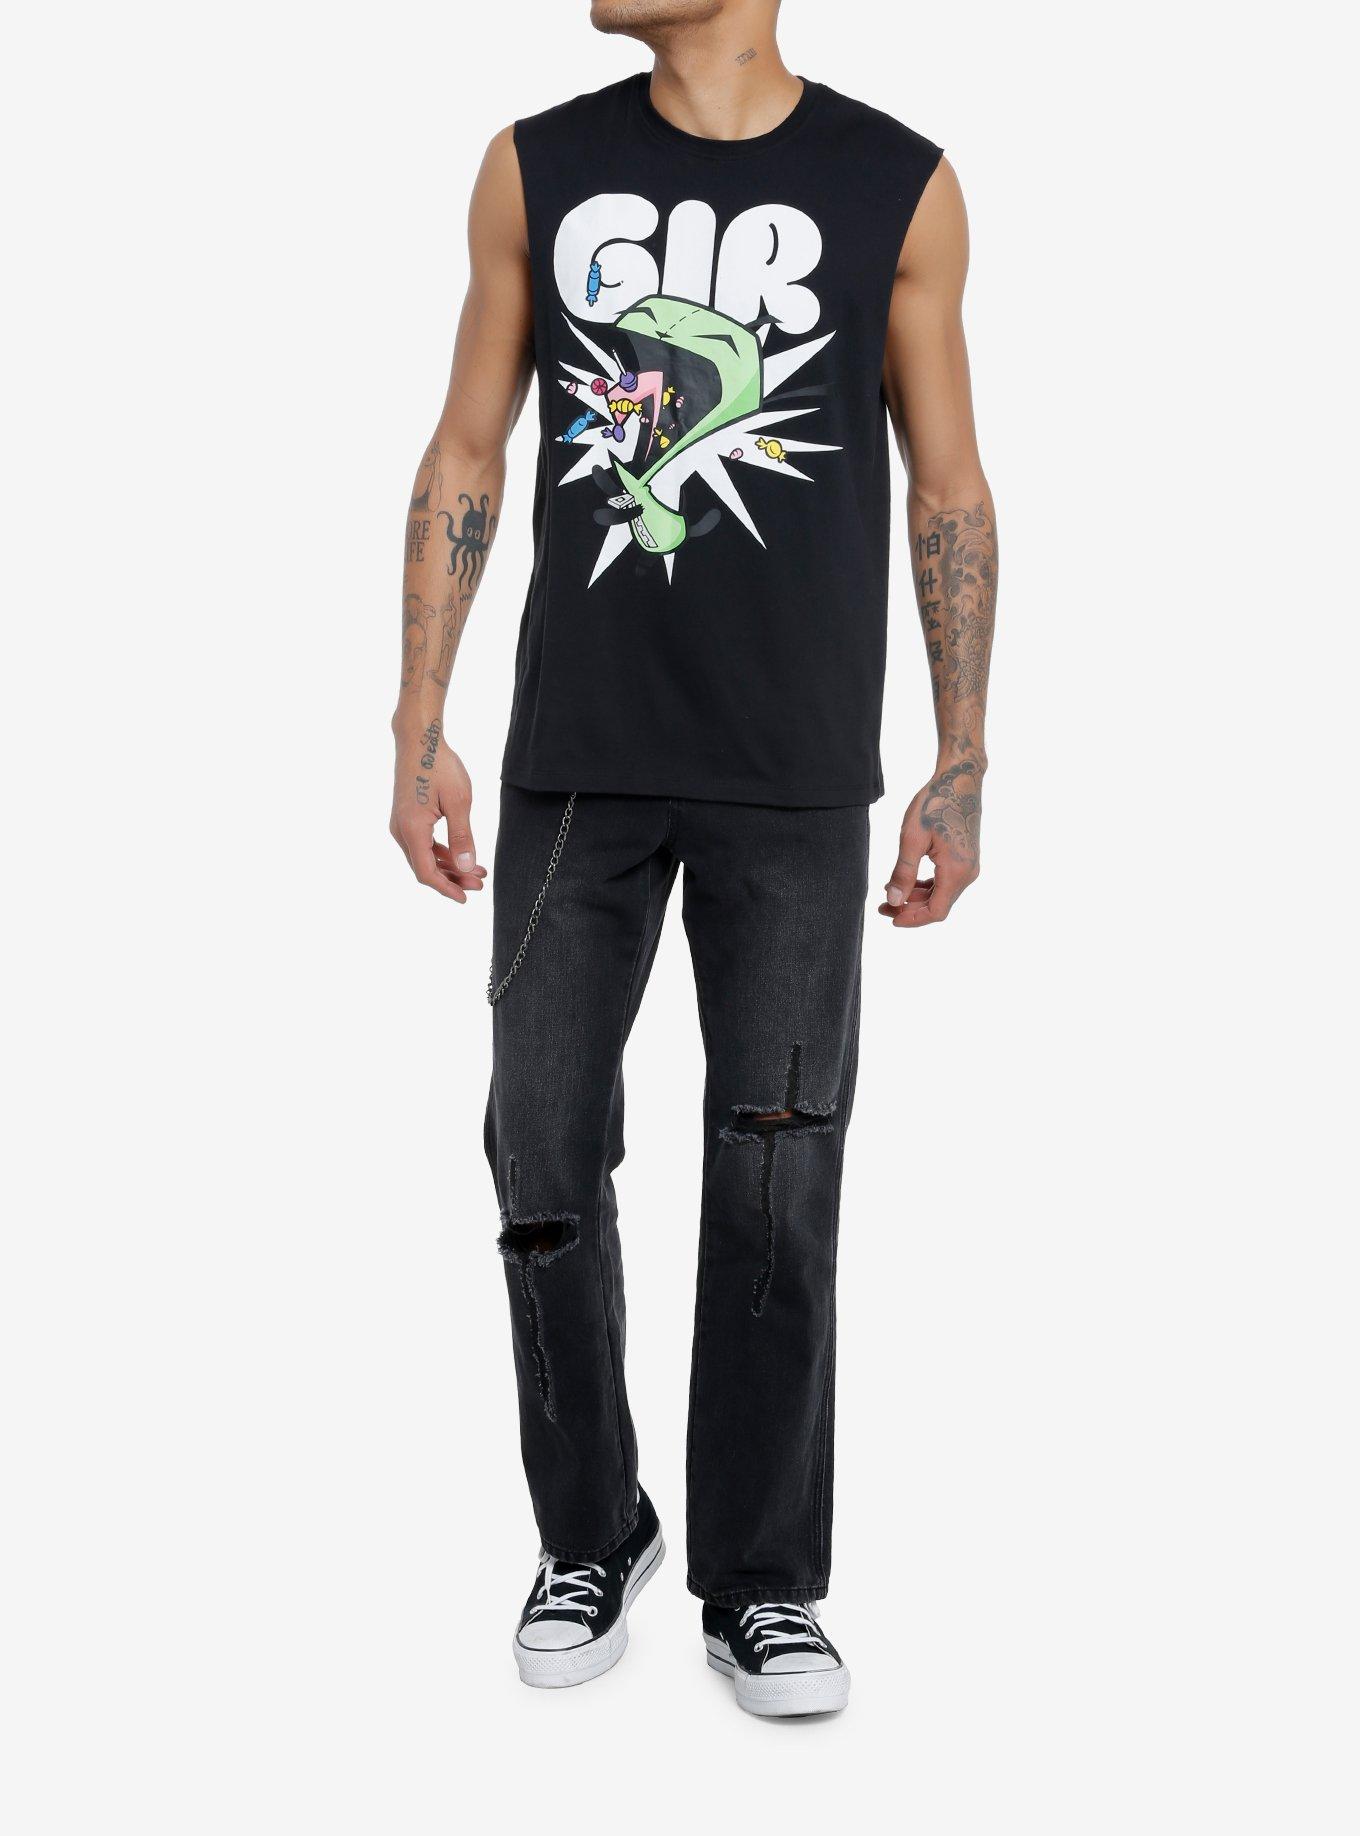 Invader Zim GIR Candy Muscle Tank Top